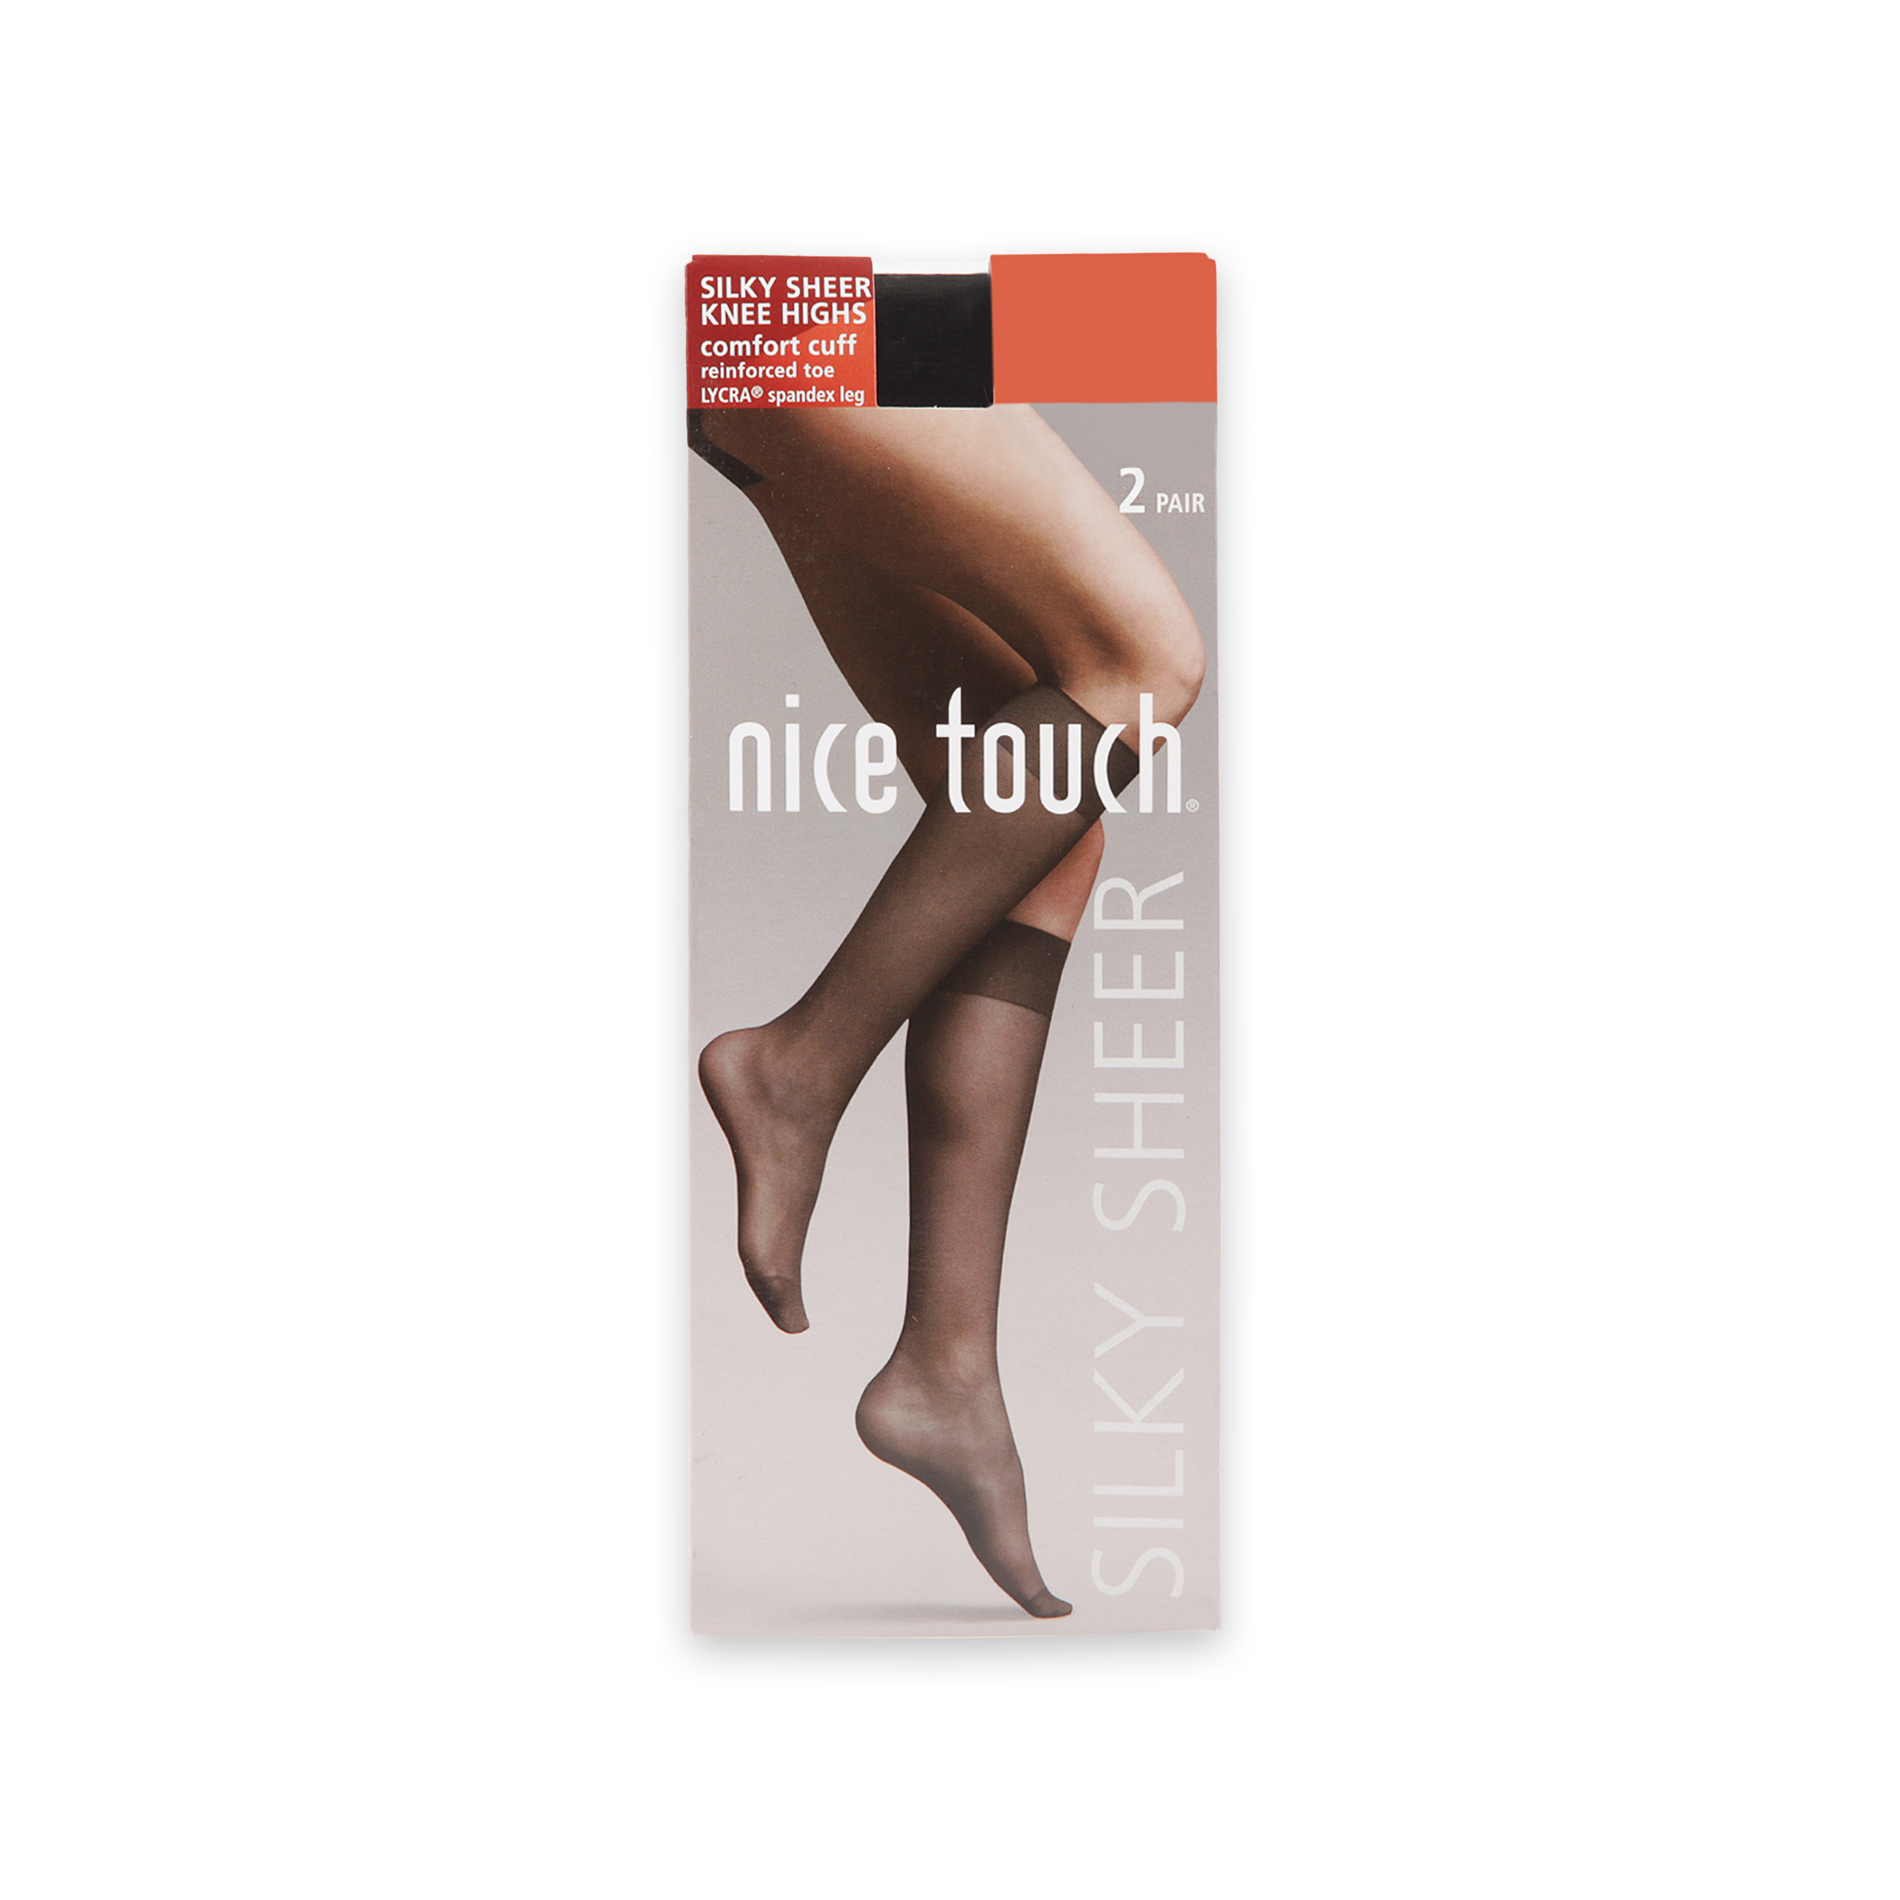 Nice Touch Women's 2-Pairs Silky Sheer Knee Highs